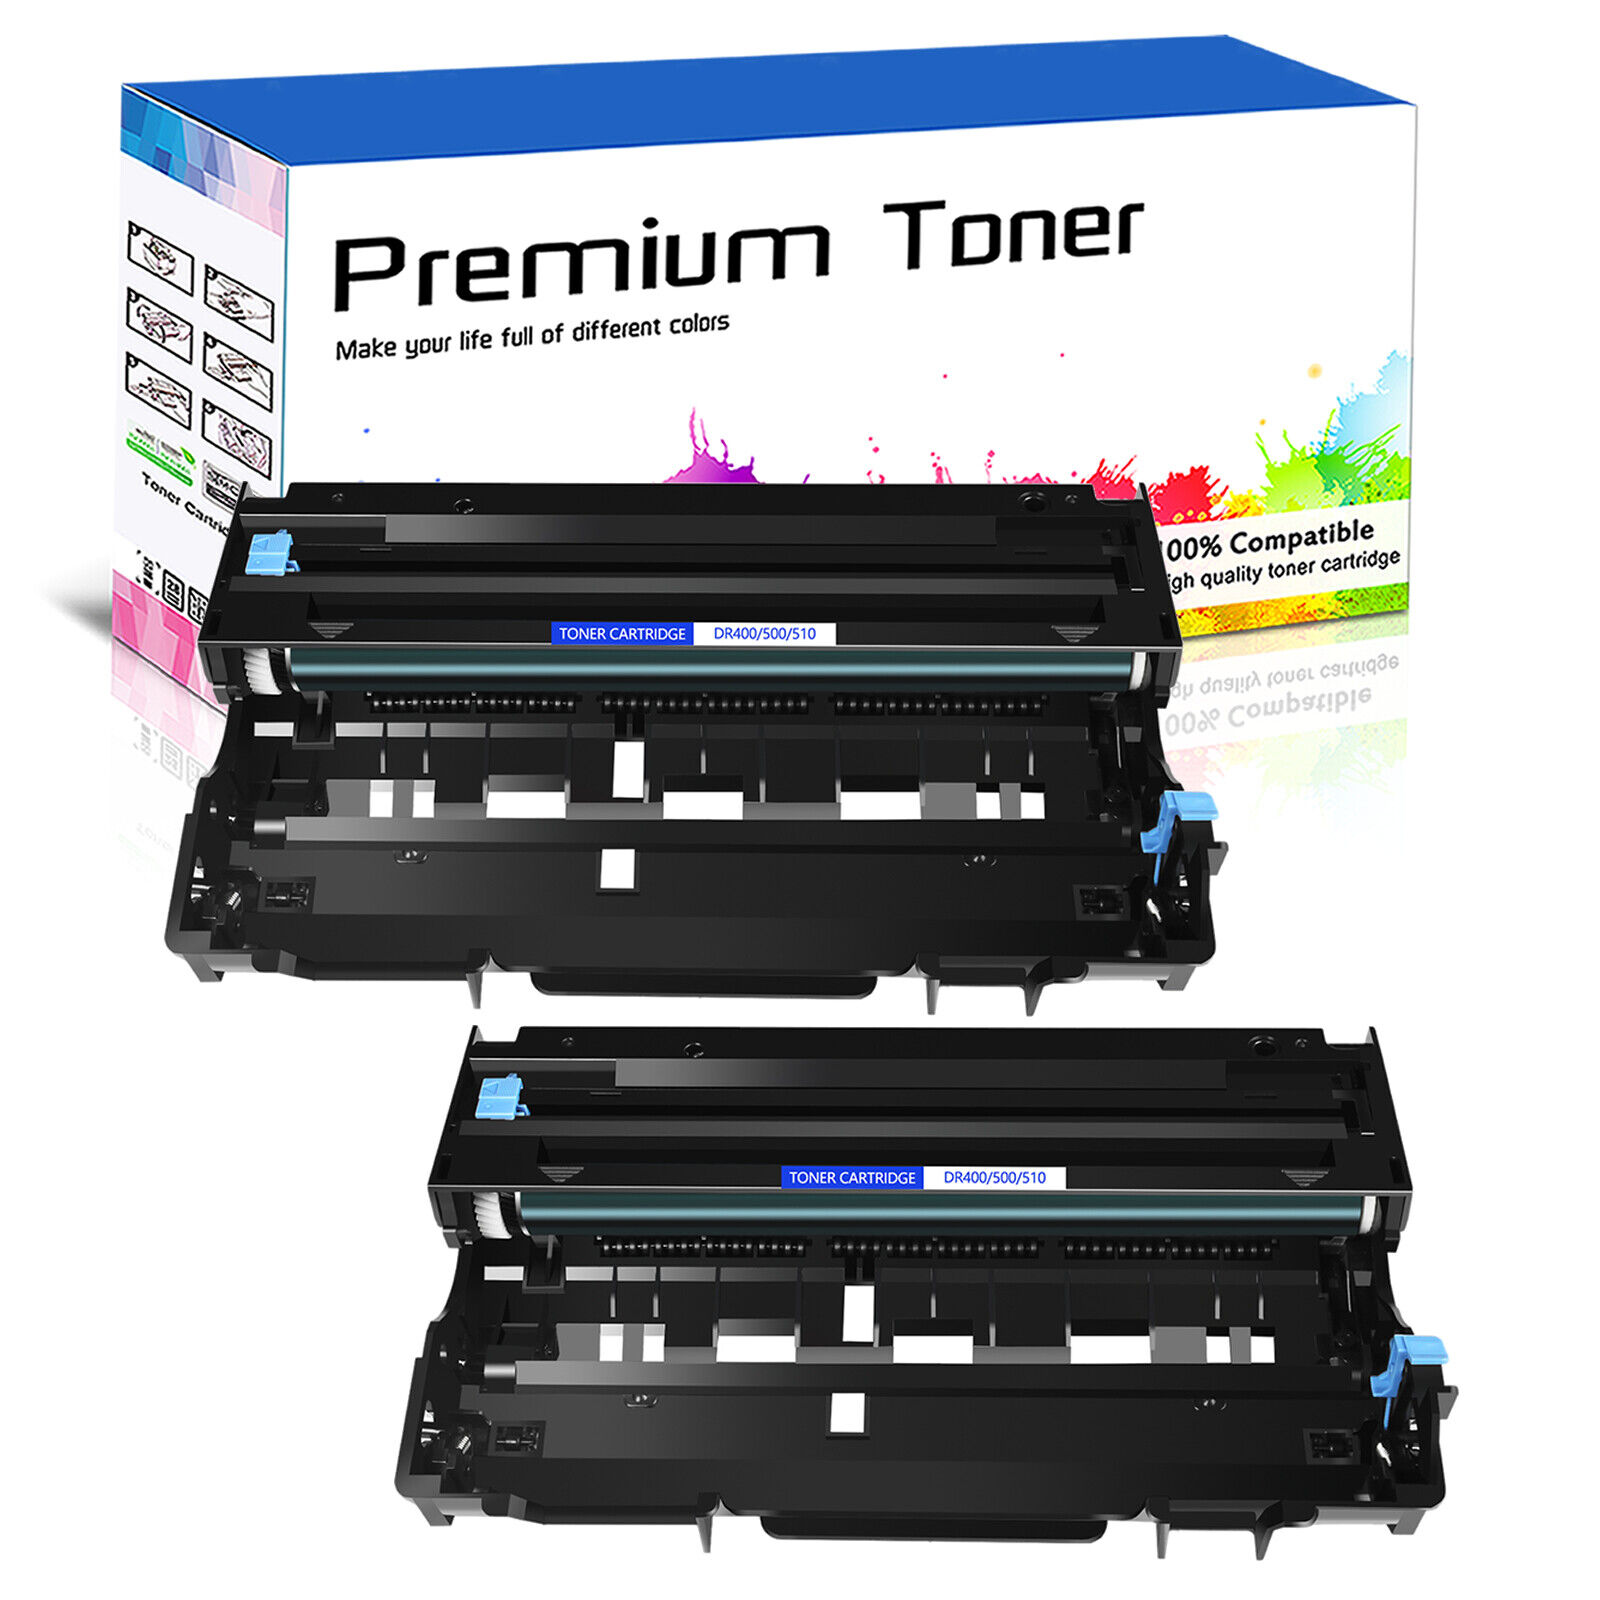 2 PACK DR400 Drum Unit for Brother DR-400 DCP-1200 DCP-1400 FAX-8350p HL-1030